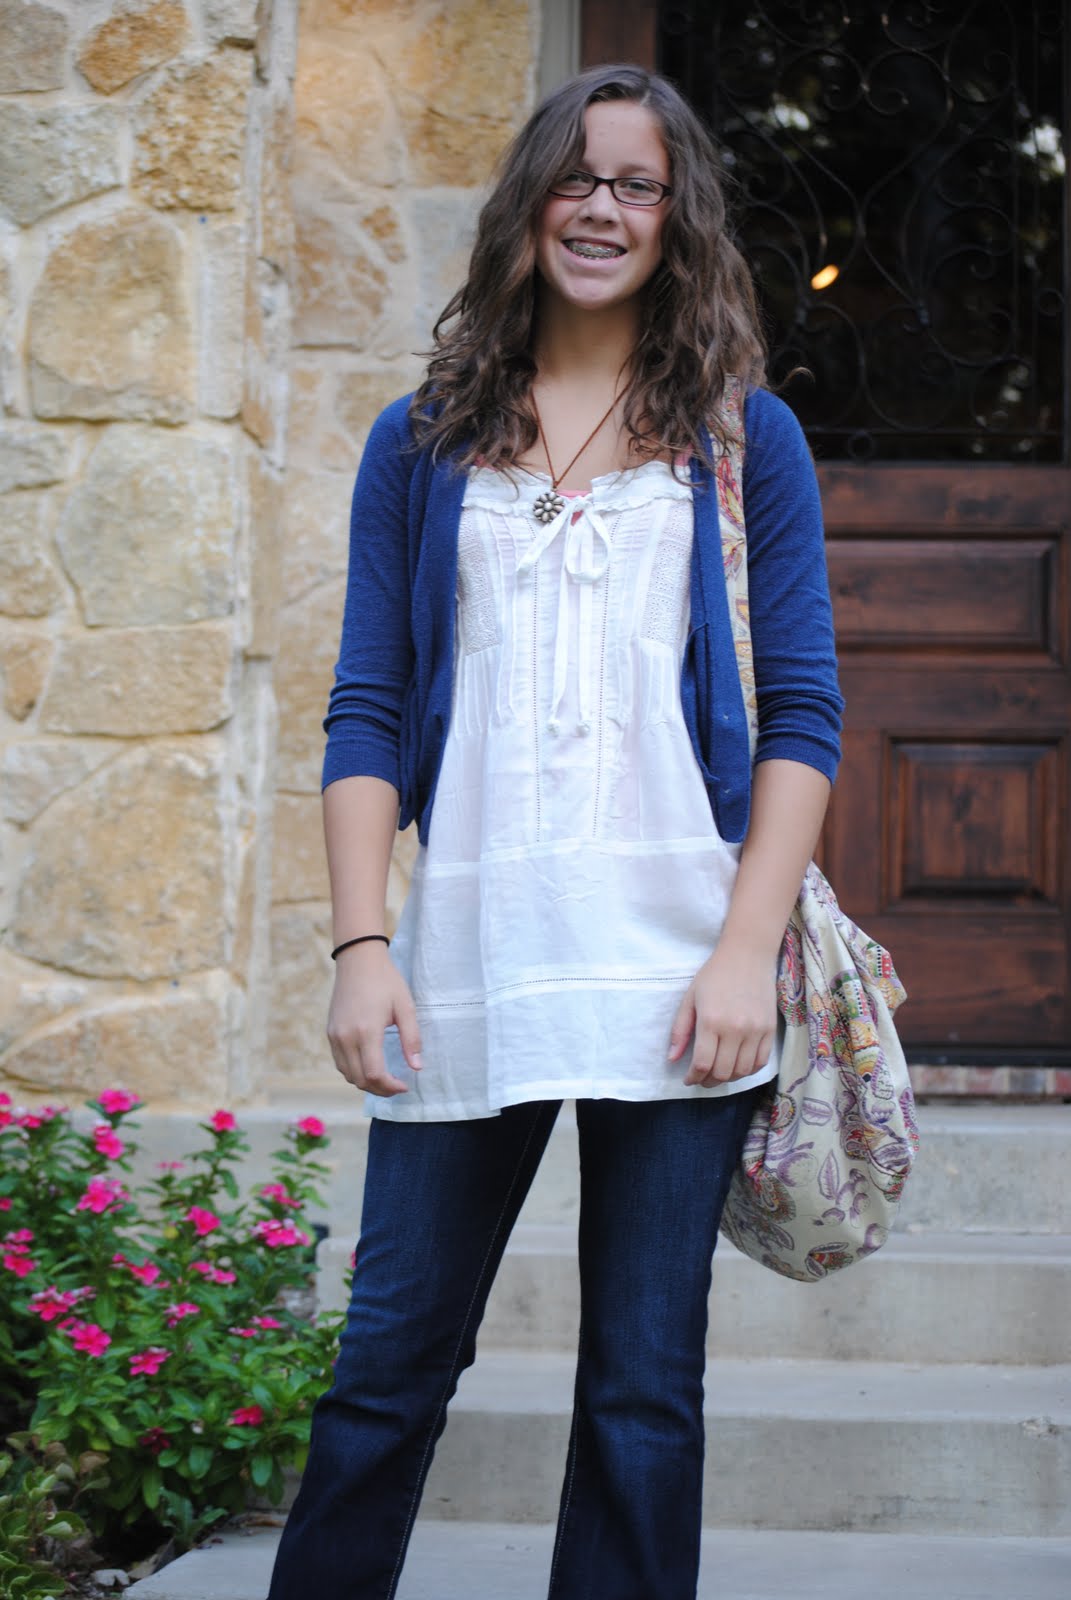 Emily- first day of 8th grade...cutie patootie!